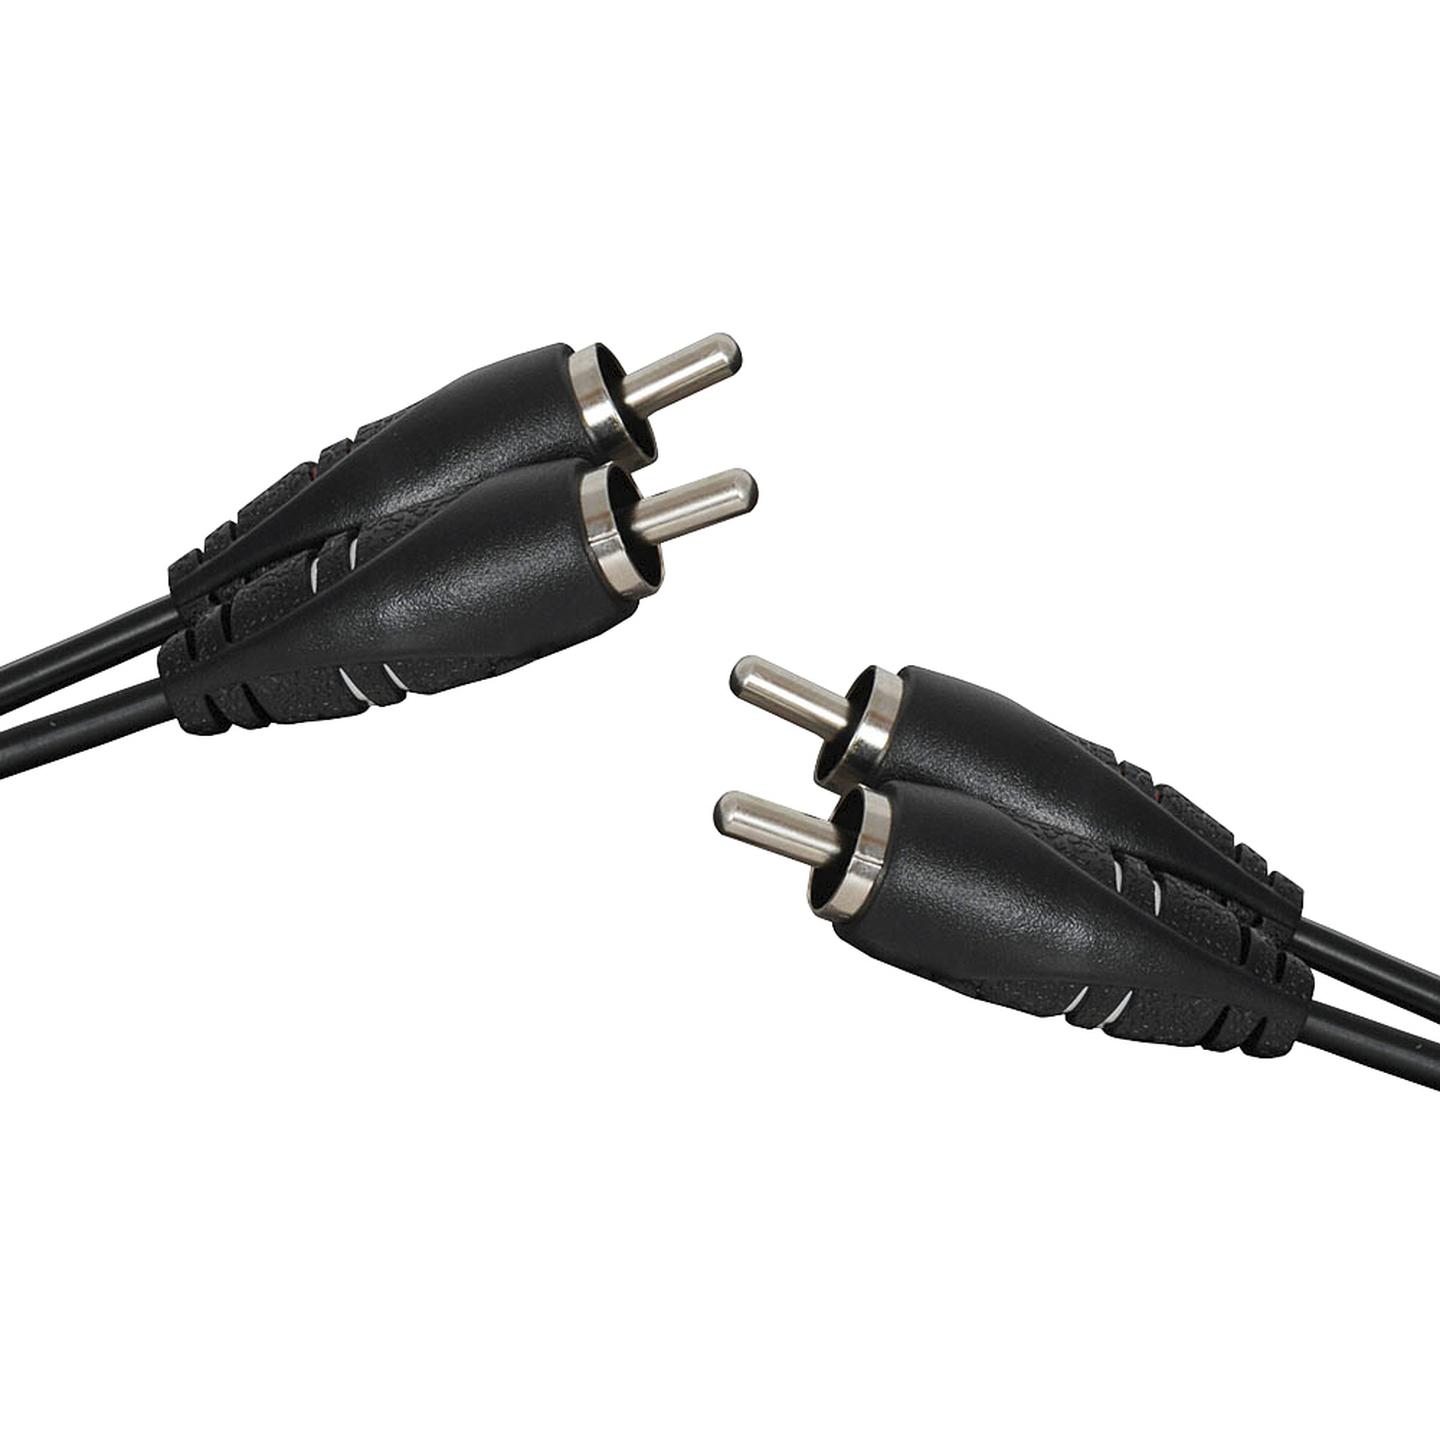 2 x RCA Plugs to 2 x RCA Plugs Audio Cable - 3m